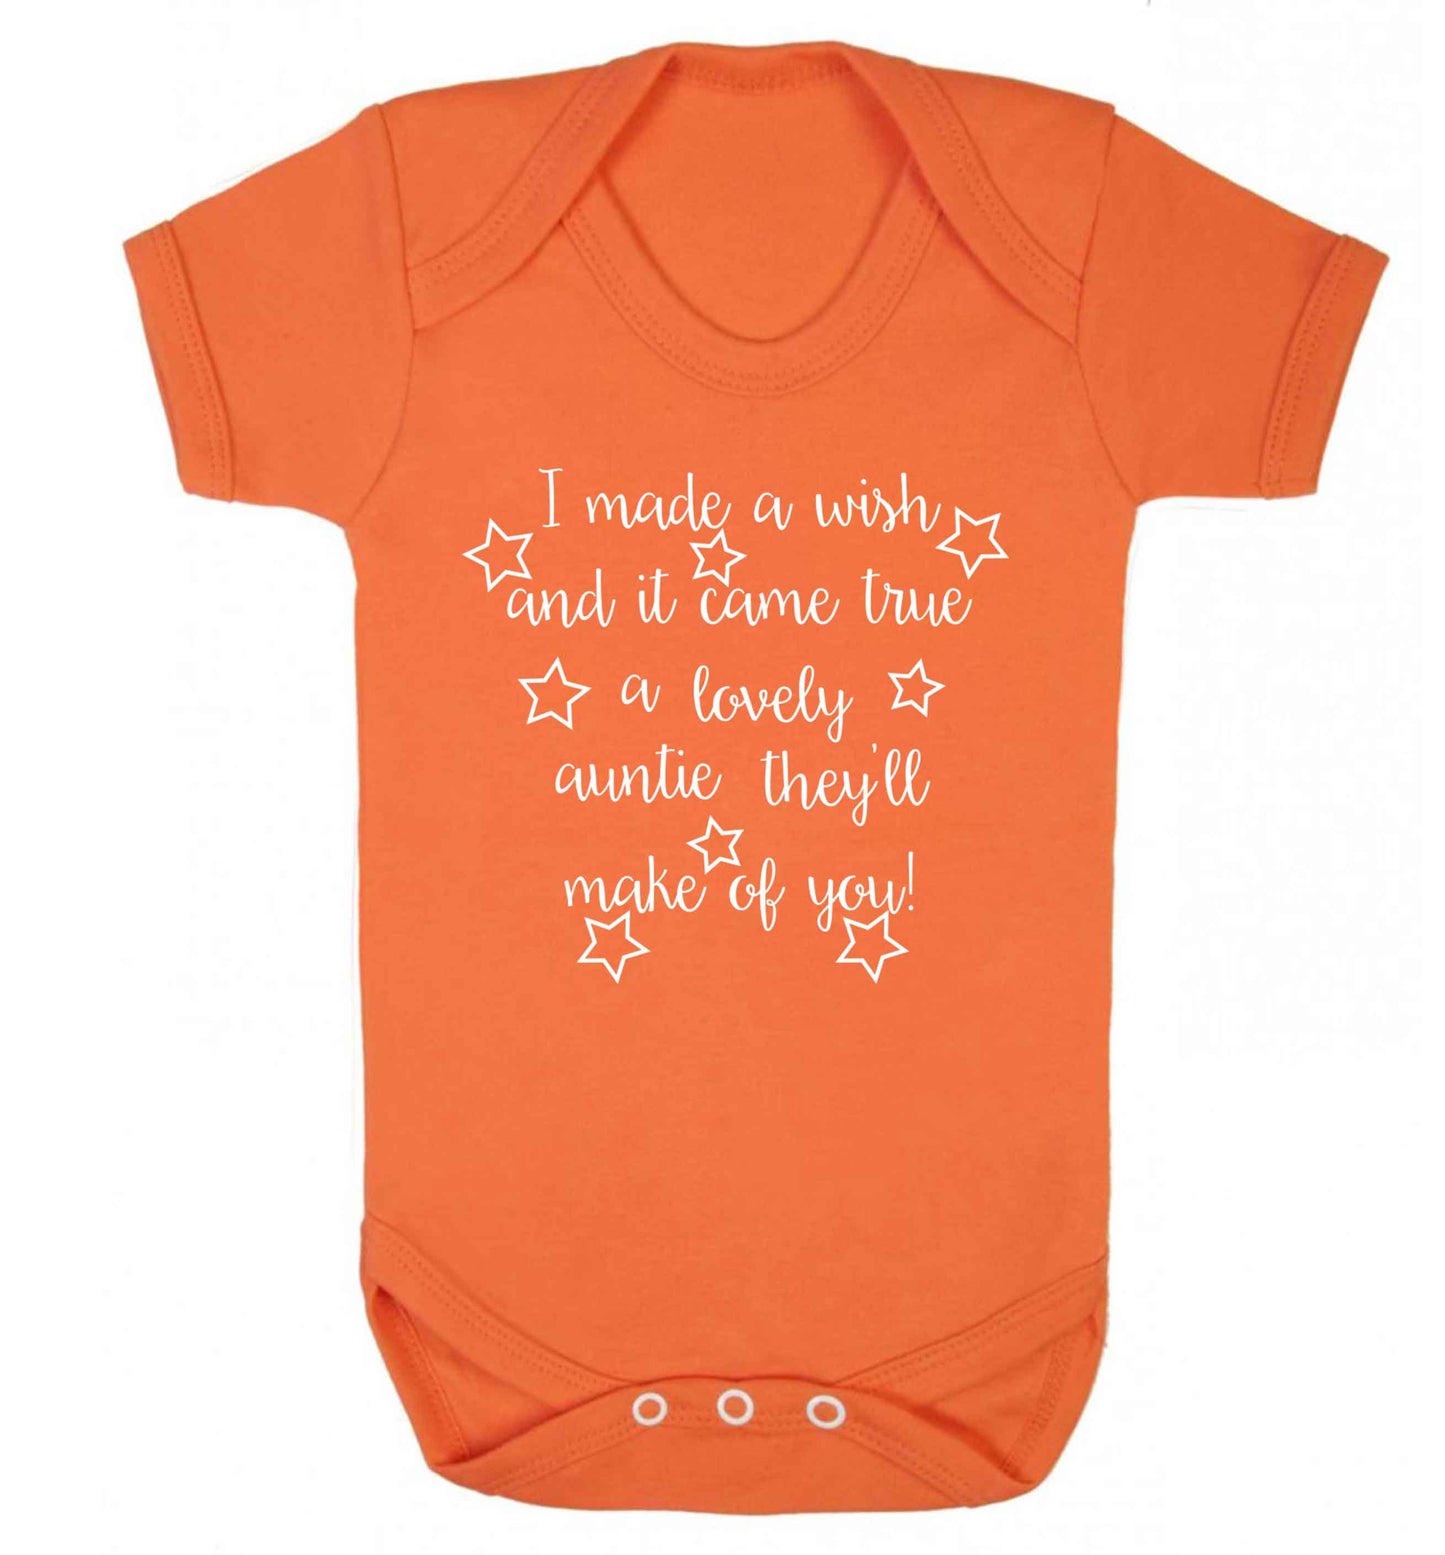 I made a wish and it came true a lovely auntie they'll make of you! Baby Vest orange 18-24 months